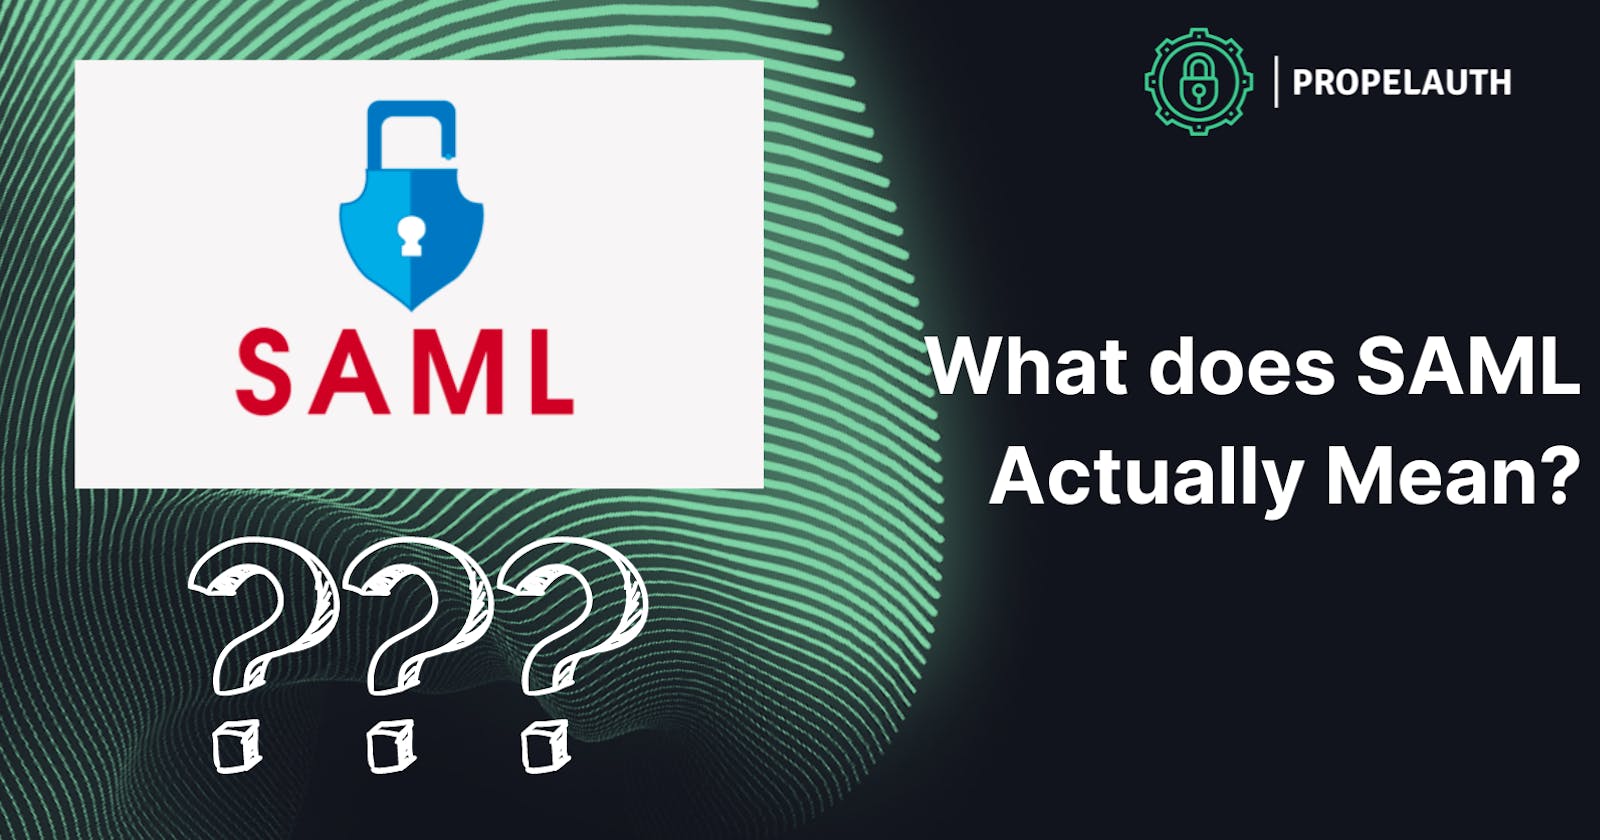 What Does SAML Actually Mean?